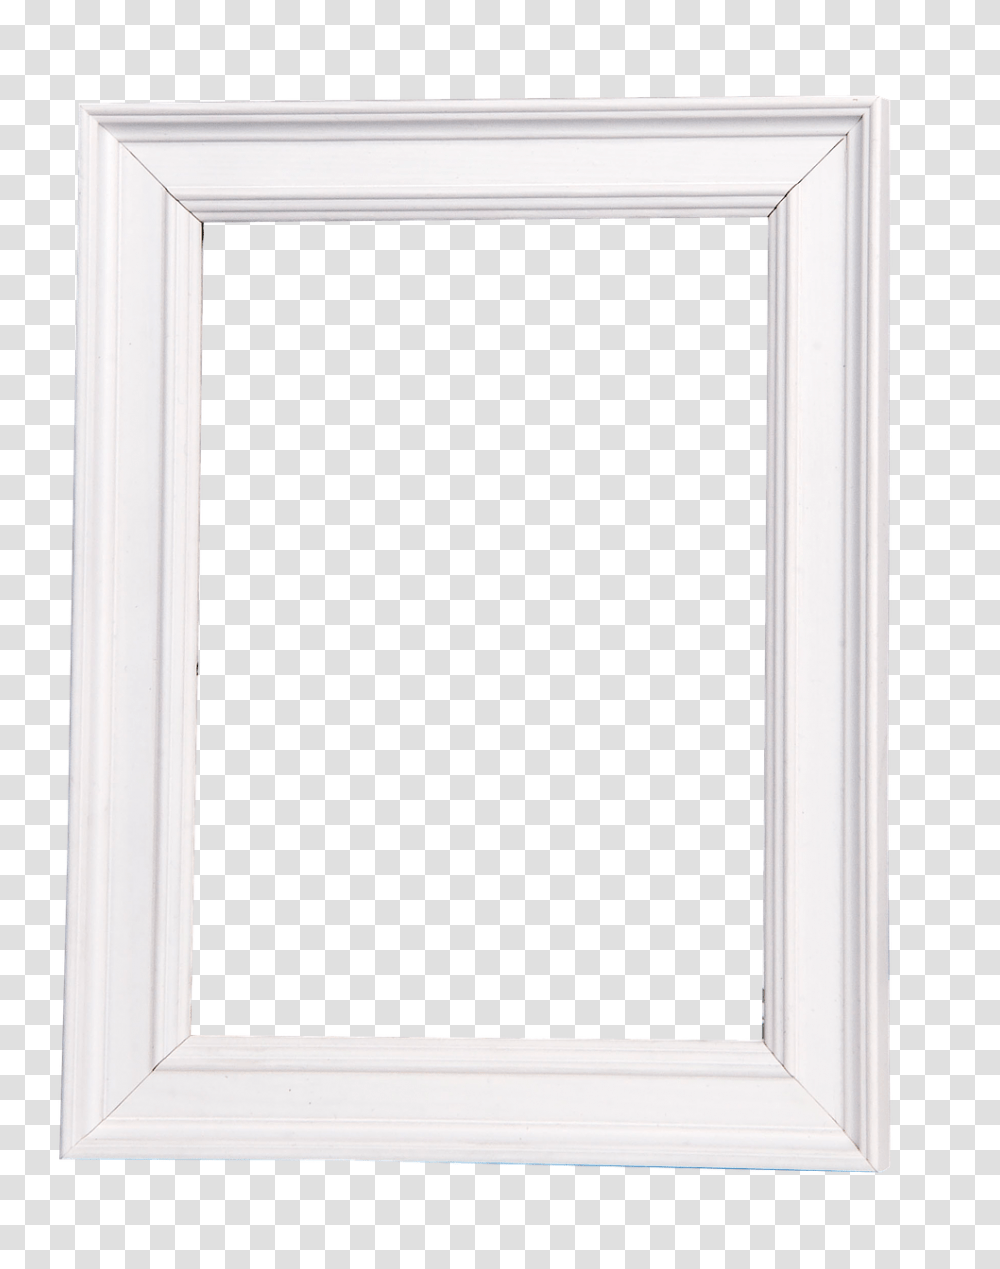 Frame White Photo Picture Frame Photos Photo Wood, Window, Picture Window Transparent Png